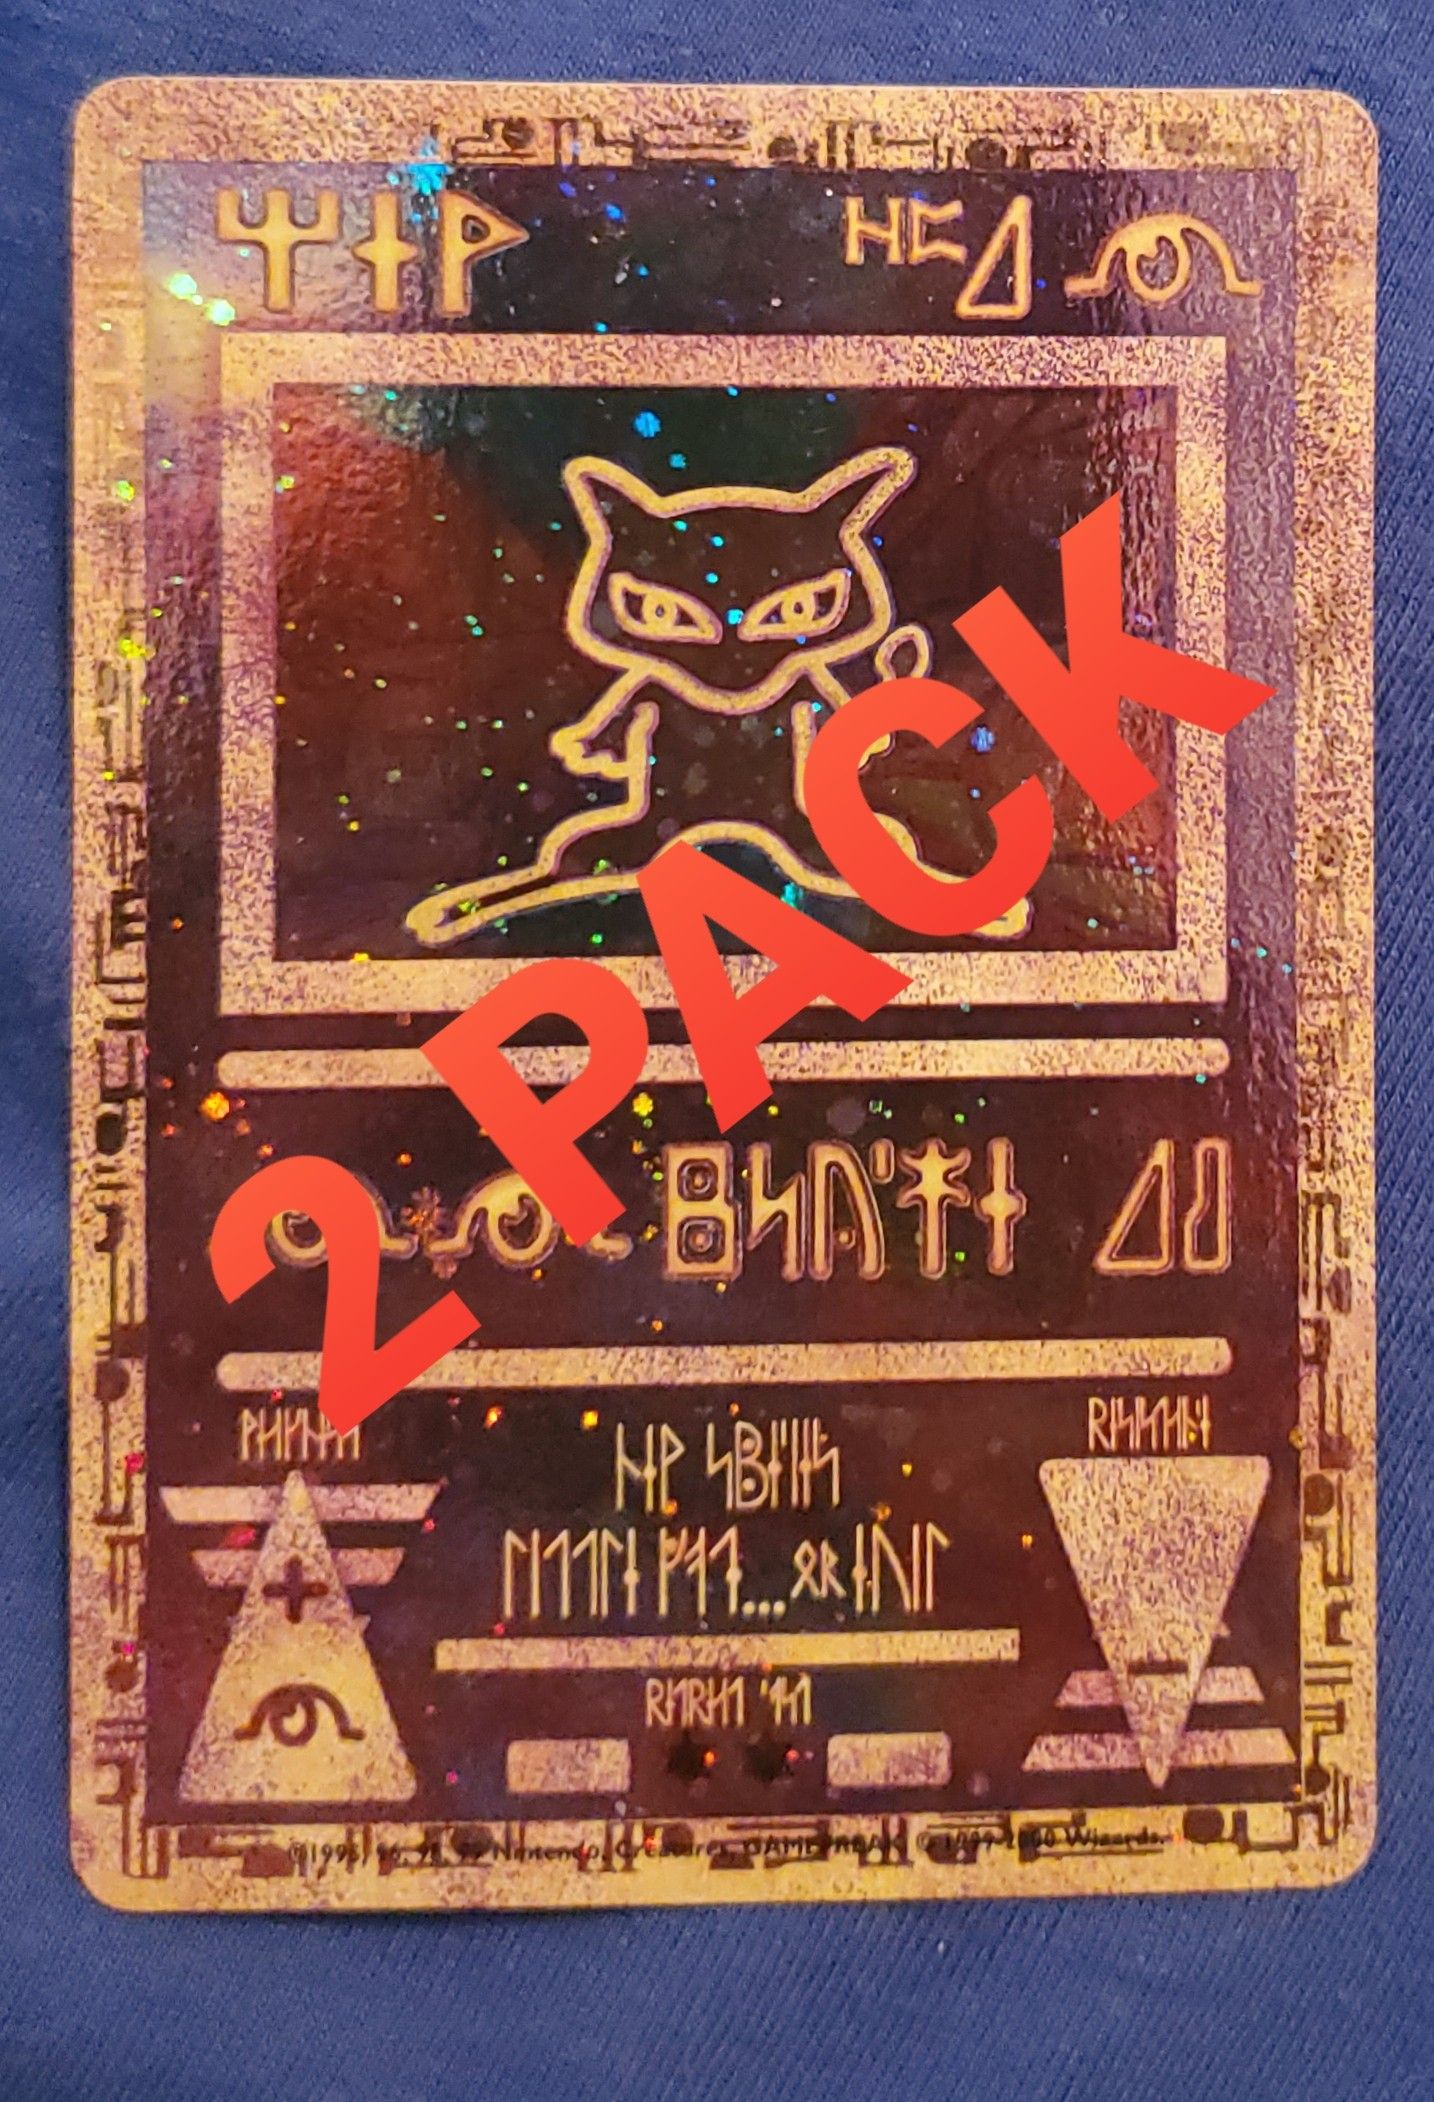 2-Pack Pokemon the Movie Promo Card - Ancient Mew